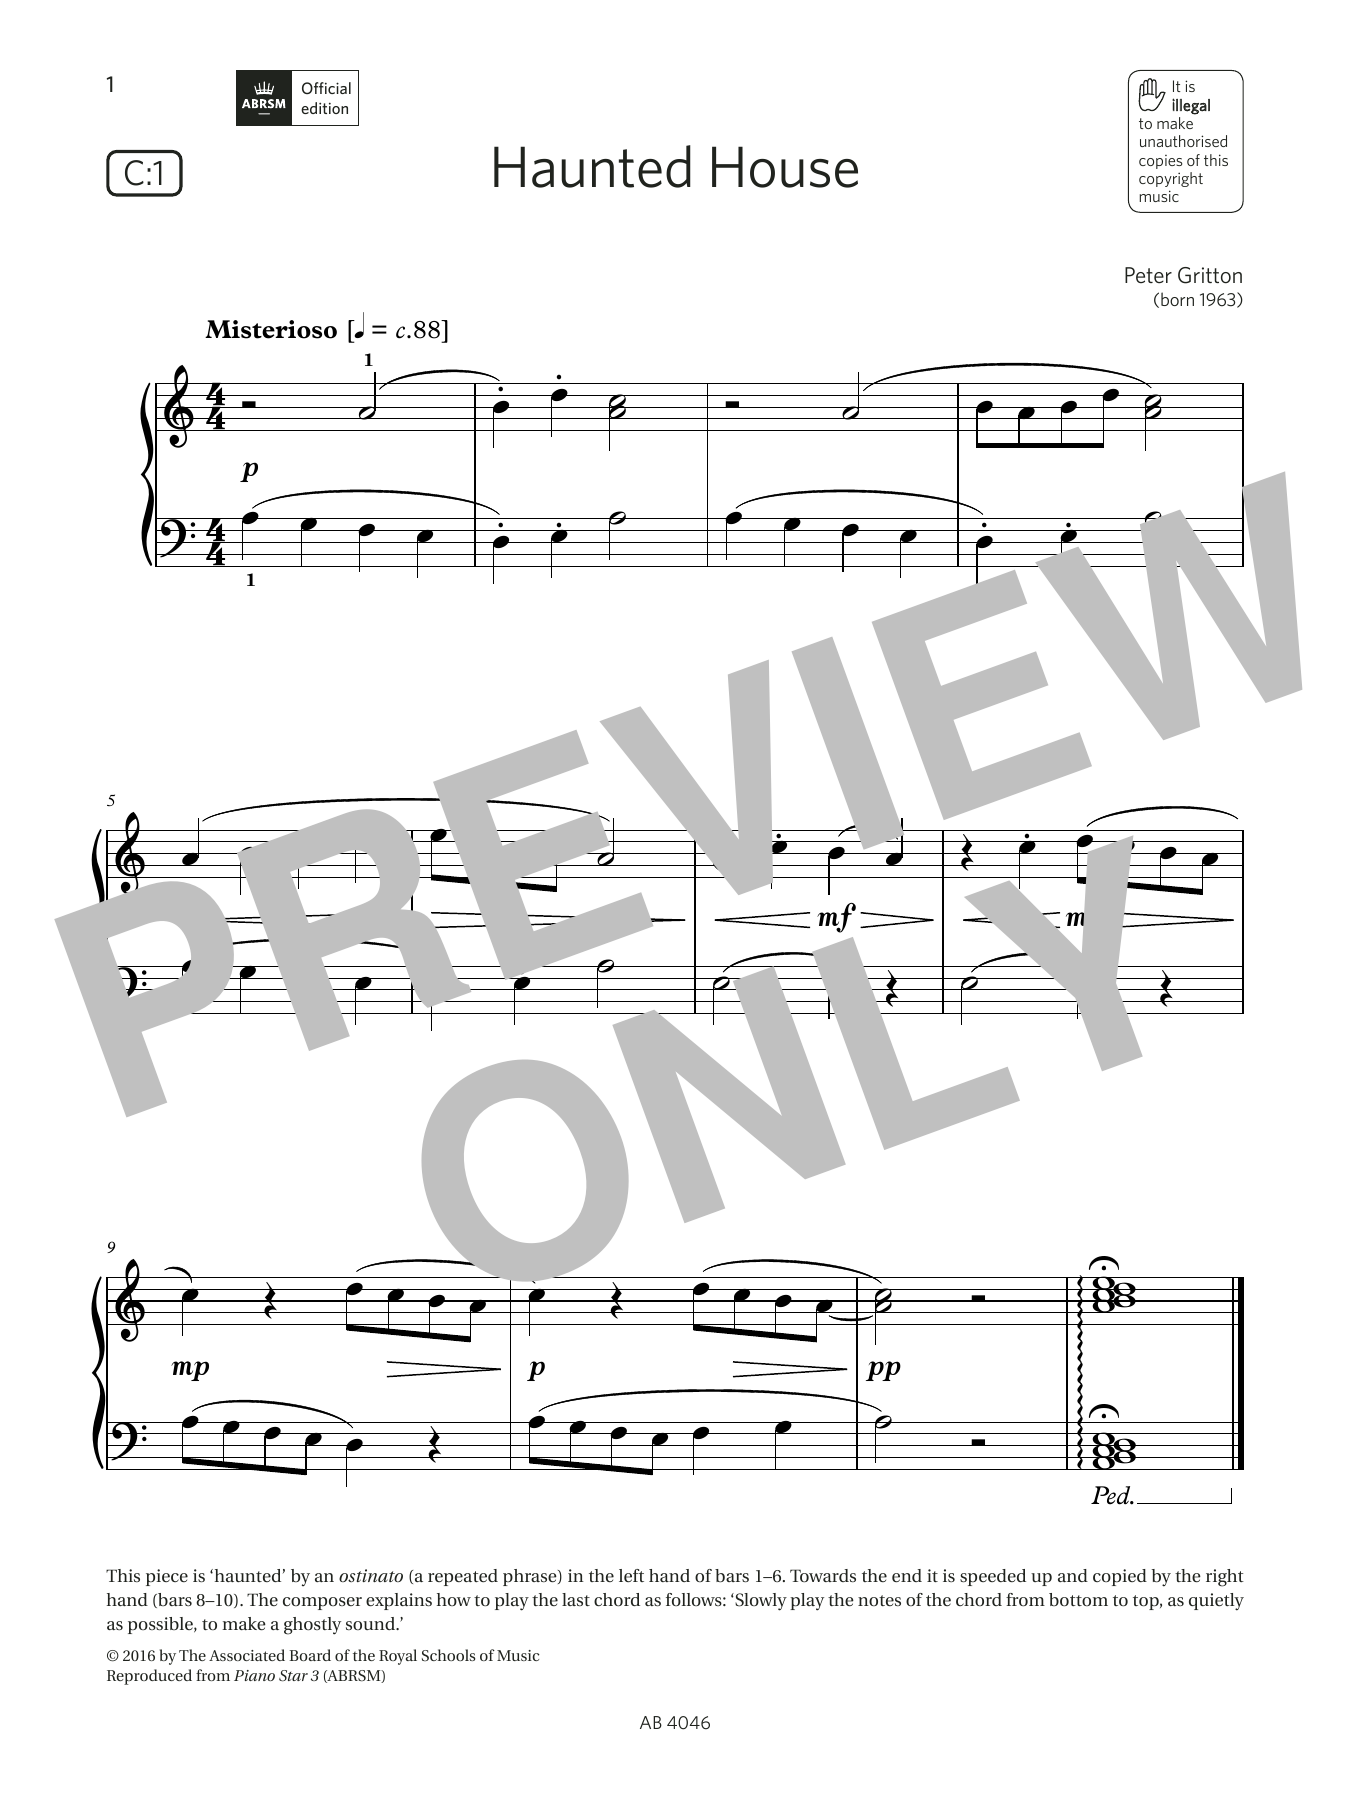 Download Peter Gritton Haunted House (Grade Initial, list C1, Sheet Music